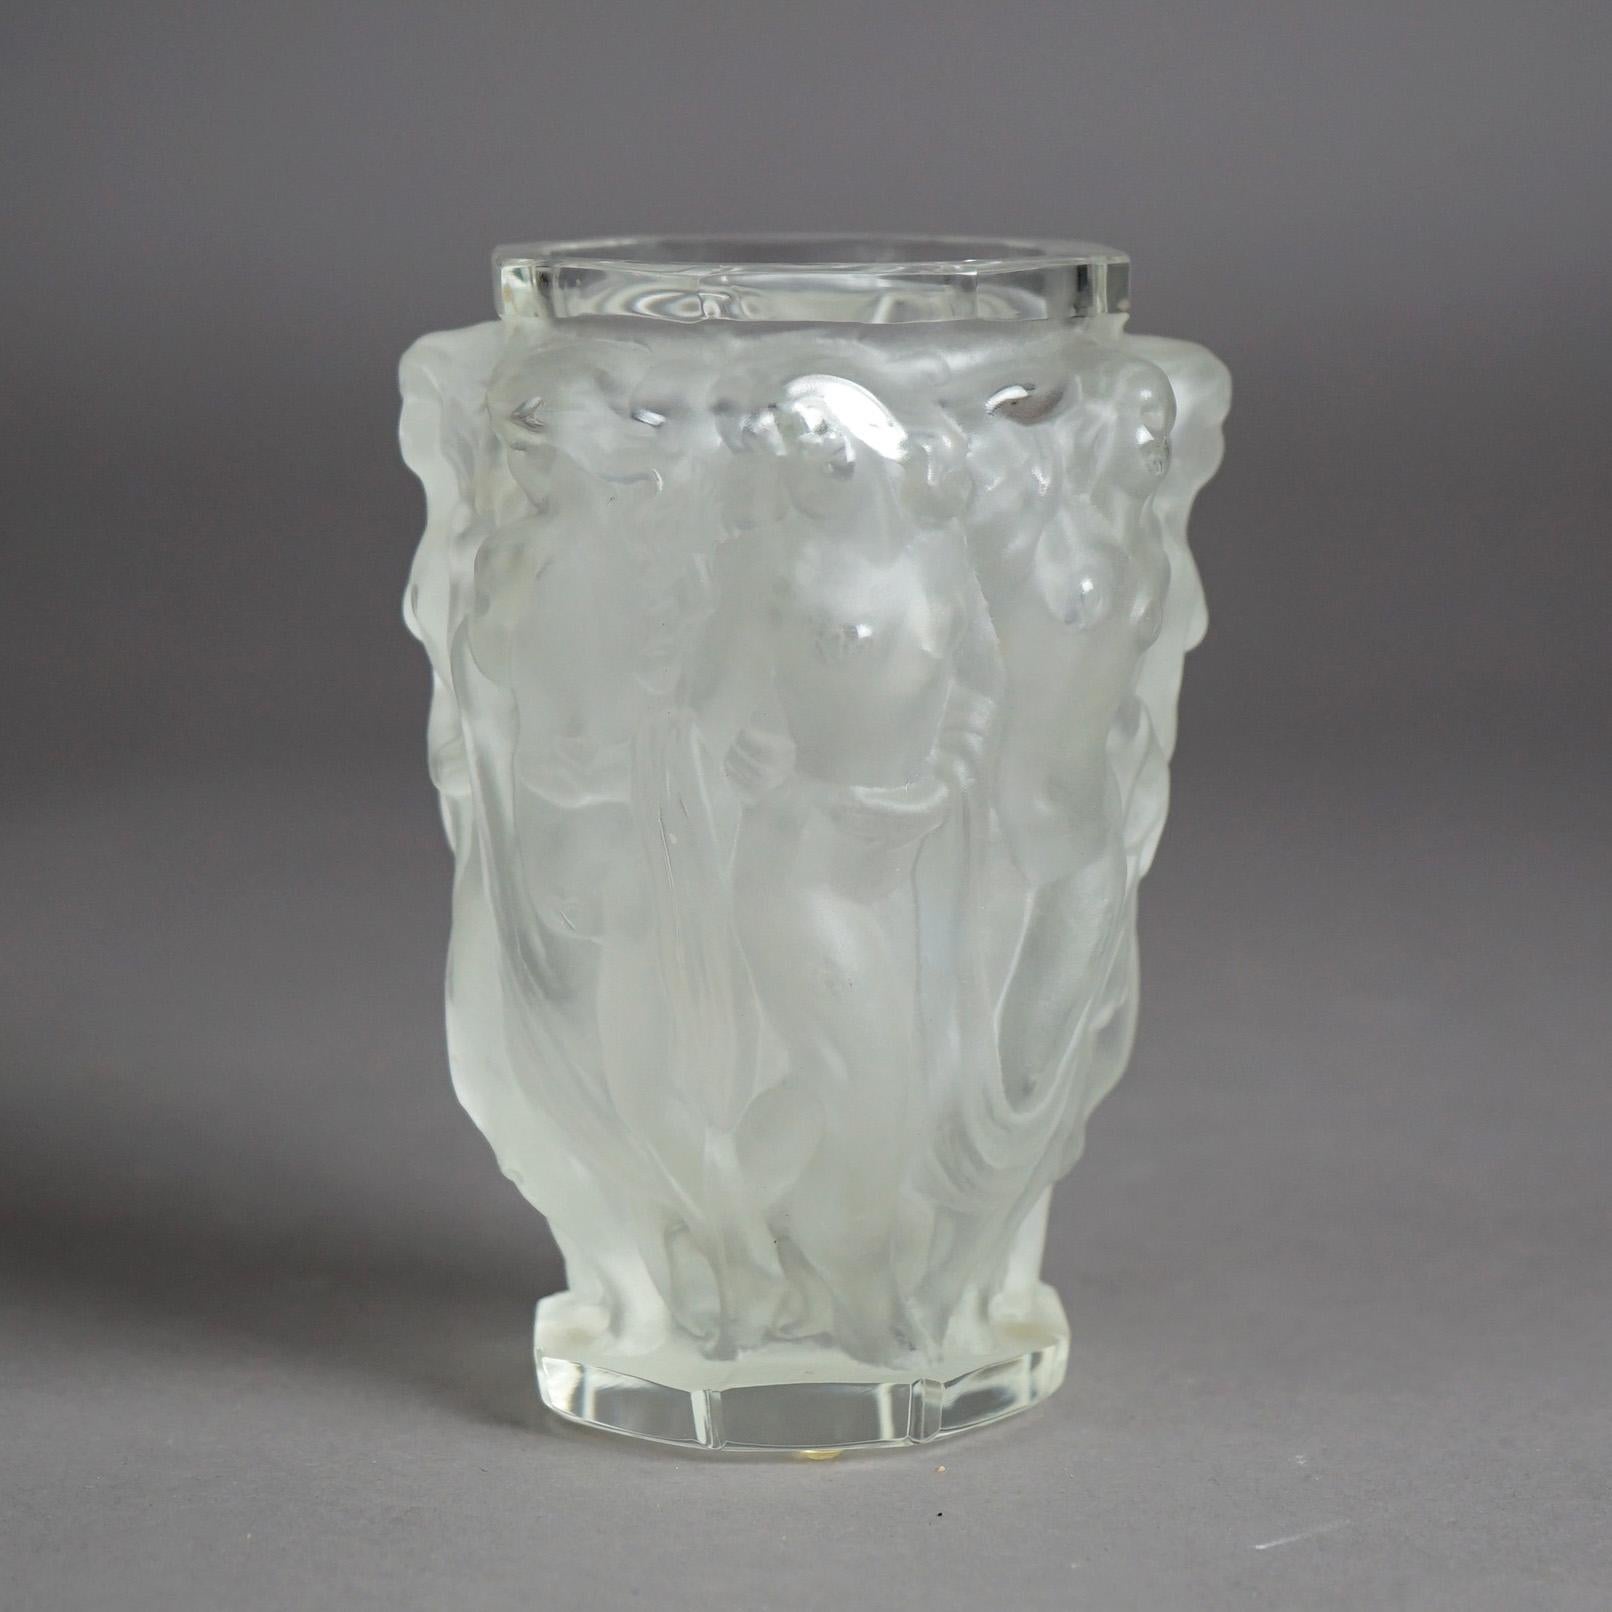 Antique Art Nouveau French Vase in the Manner of Lalique with Molded Nude Female Figures Signed FH C1920

Measures - 5.75